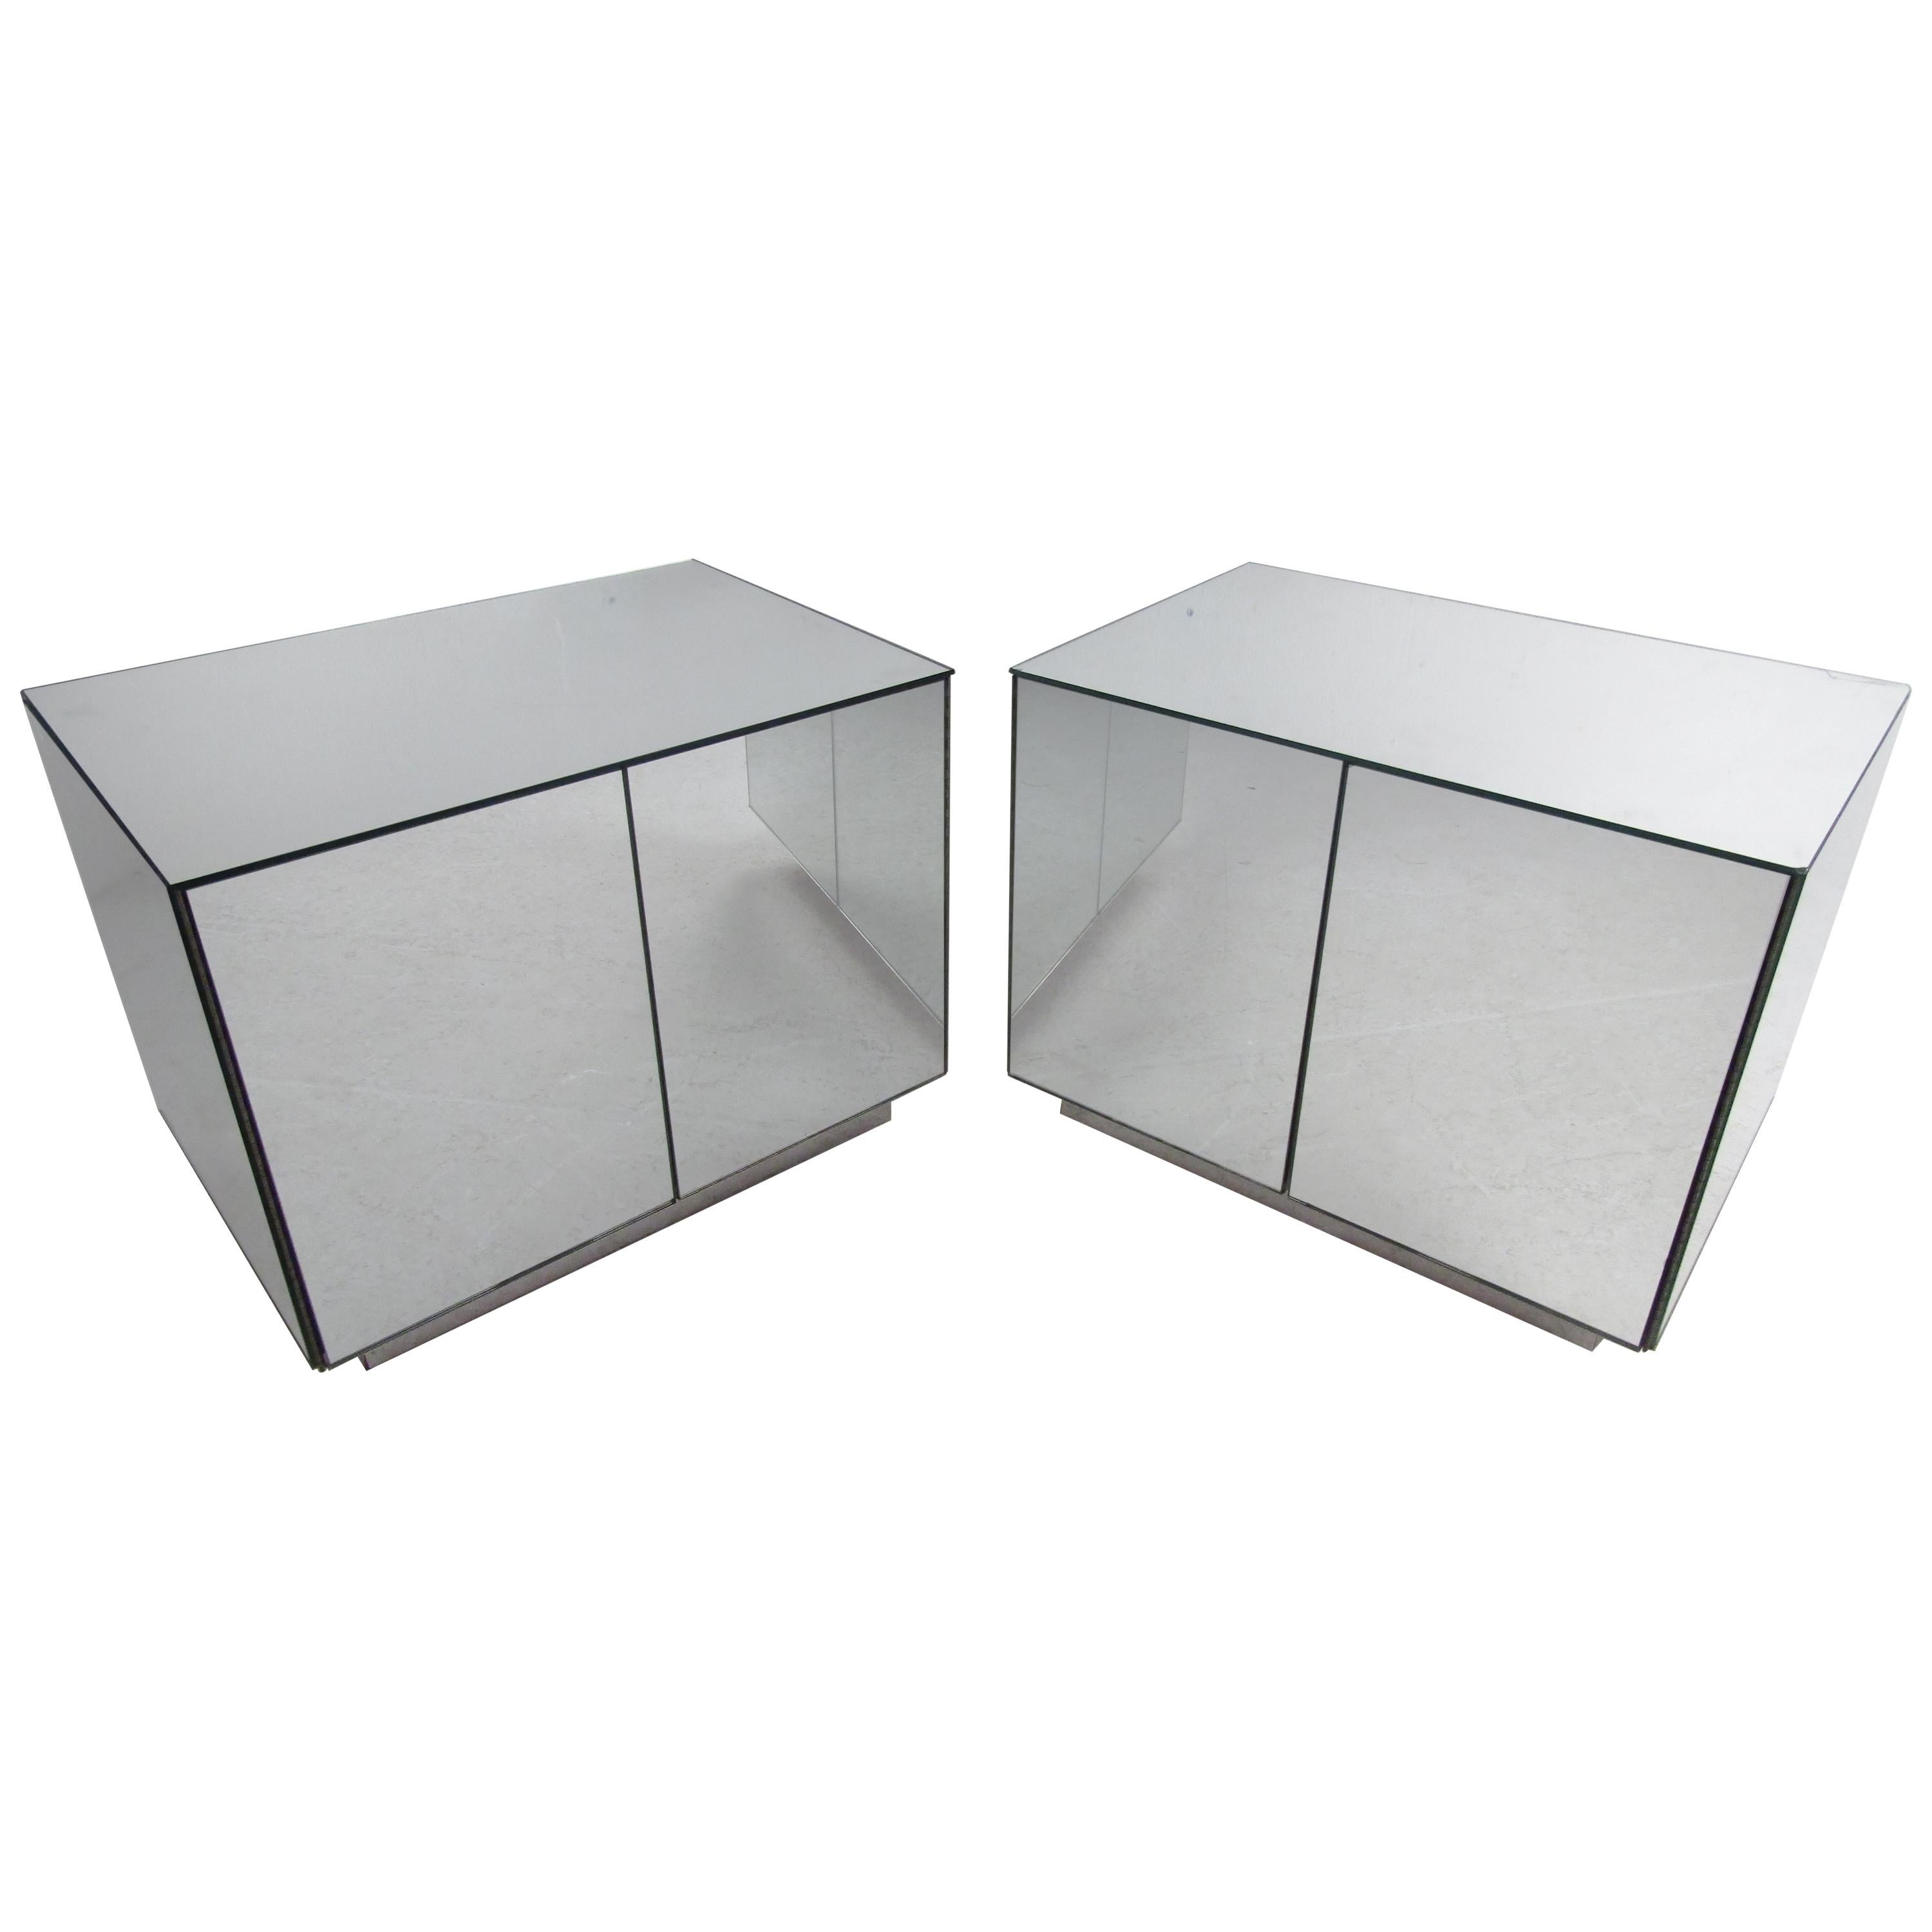 Pair of Vintage Modern Mirrored Cabinets